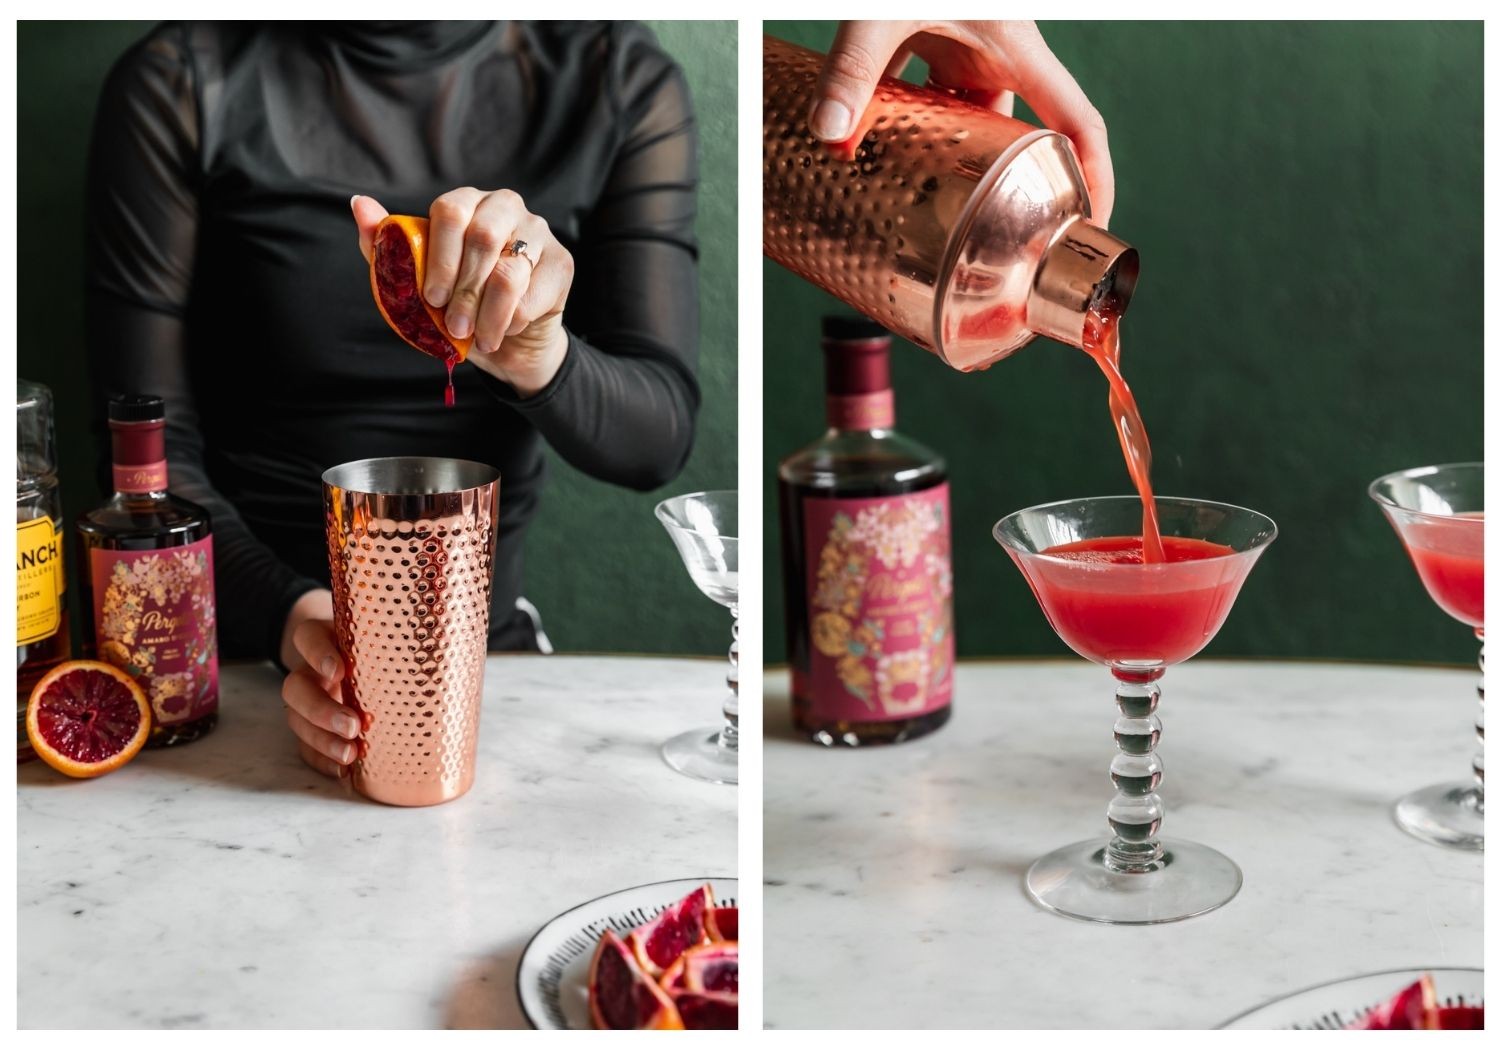 Two images; on the left, a woman wearing black is squeezing half of a blood orange into a copper cocktail shaker on a marble table surrounded by two bottles of alcohol and a coupe glass. On the right, the woman's hand is pouring the cocktail into a coupe glass.